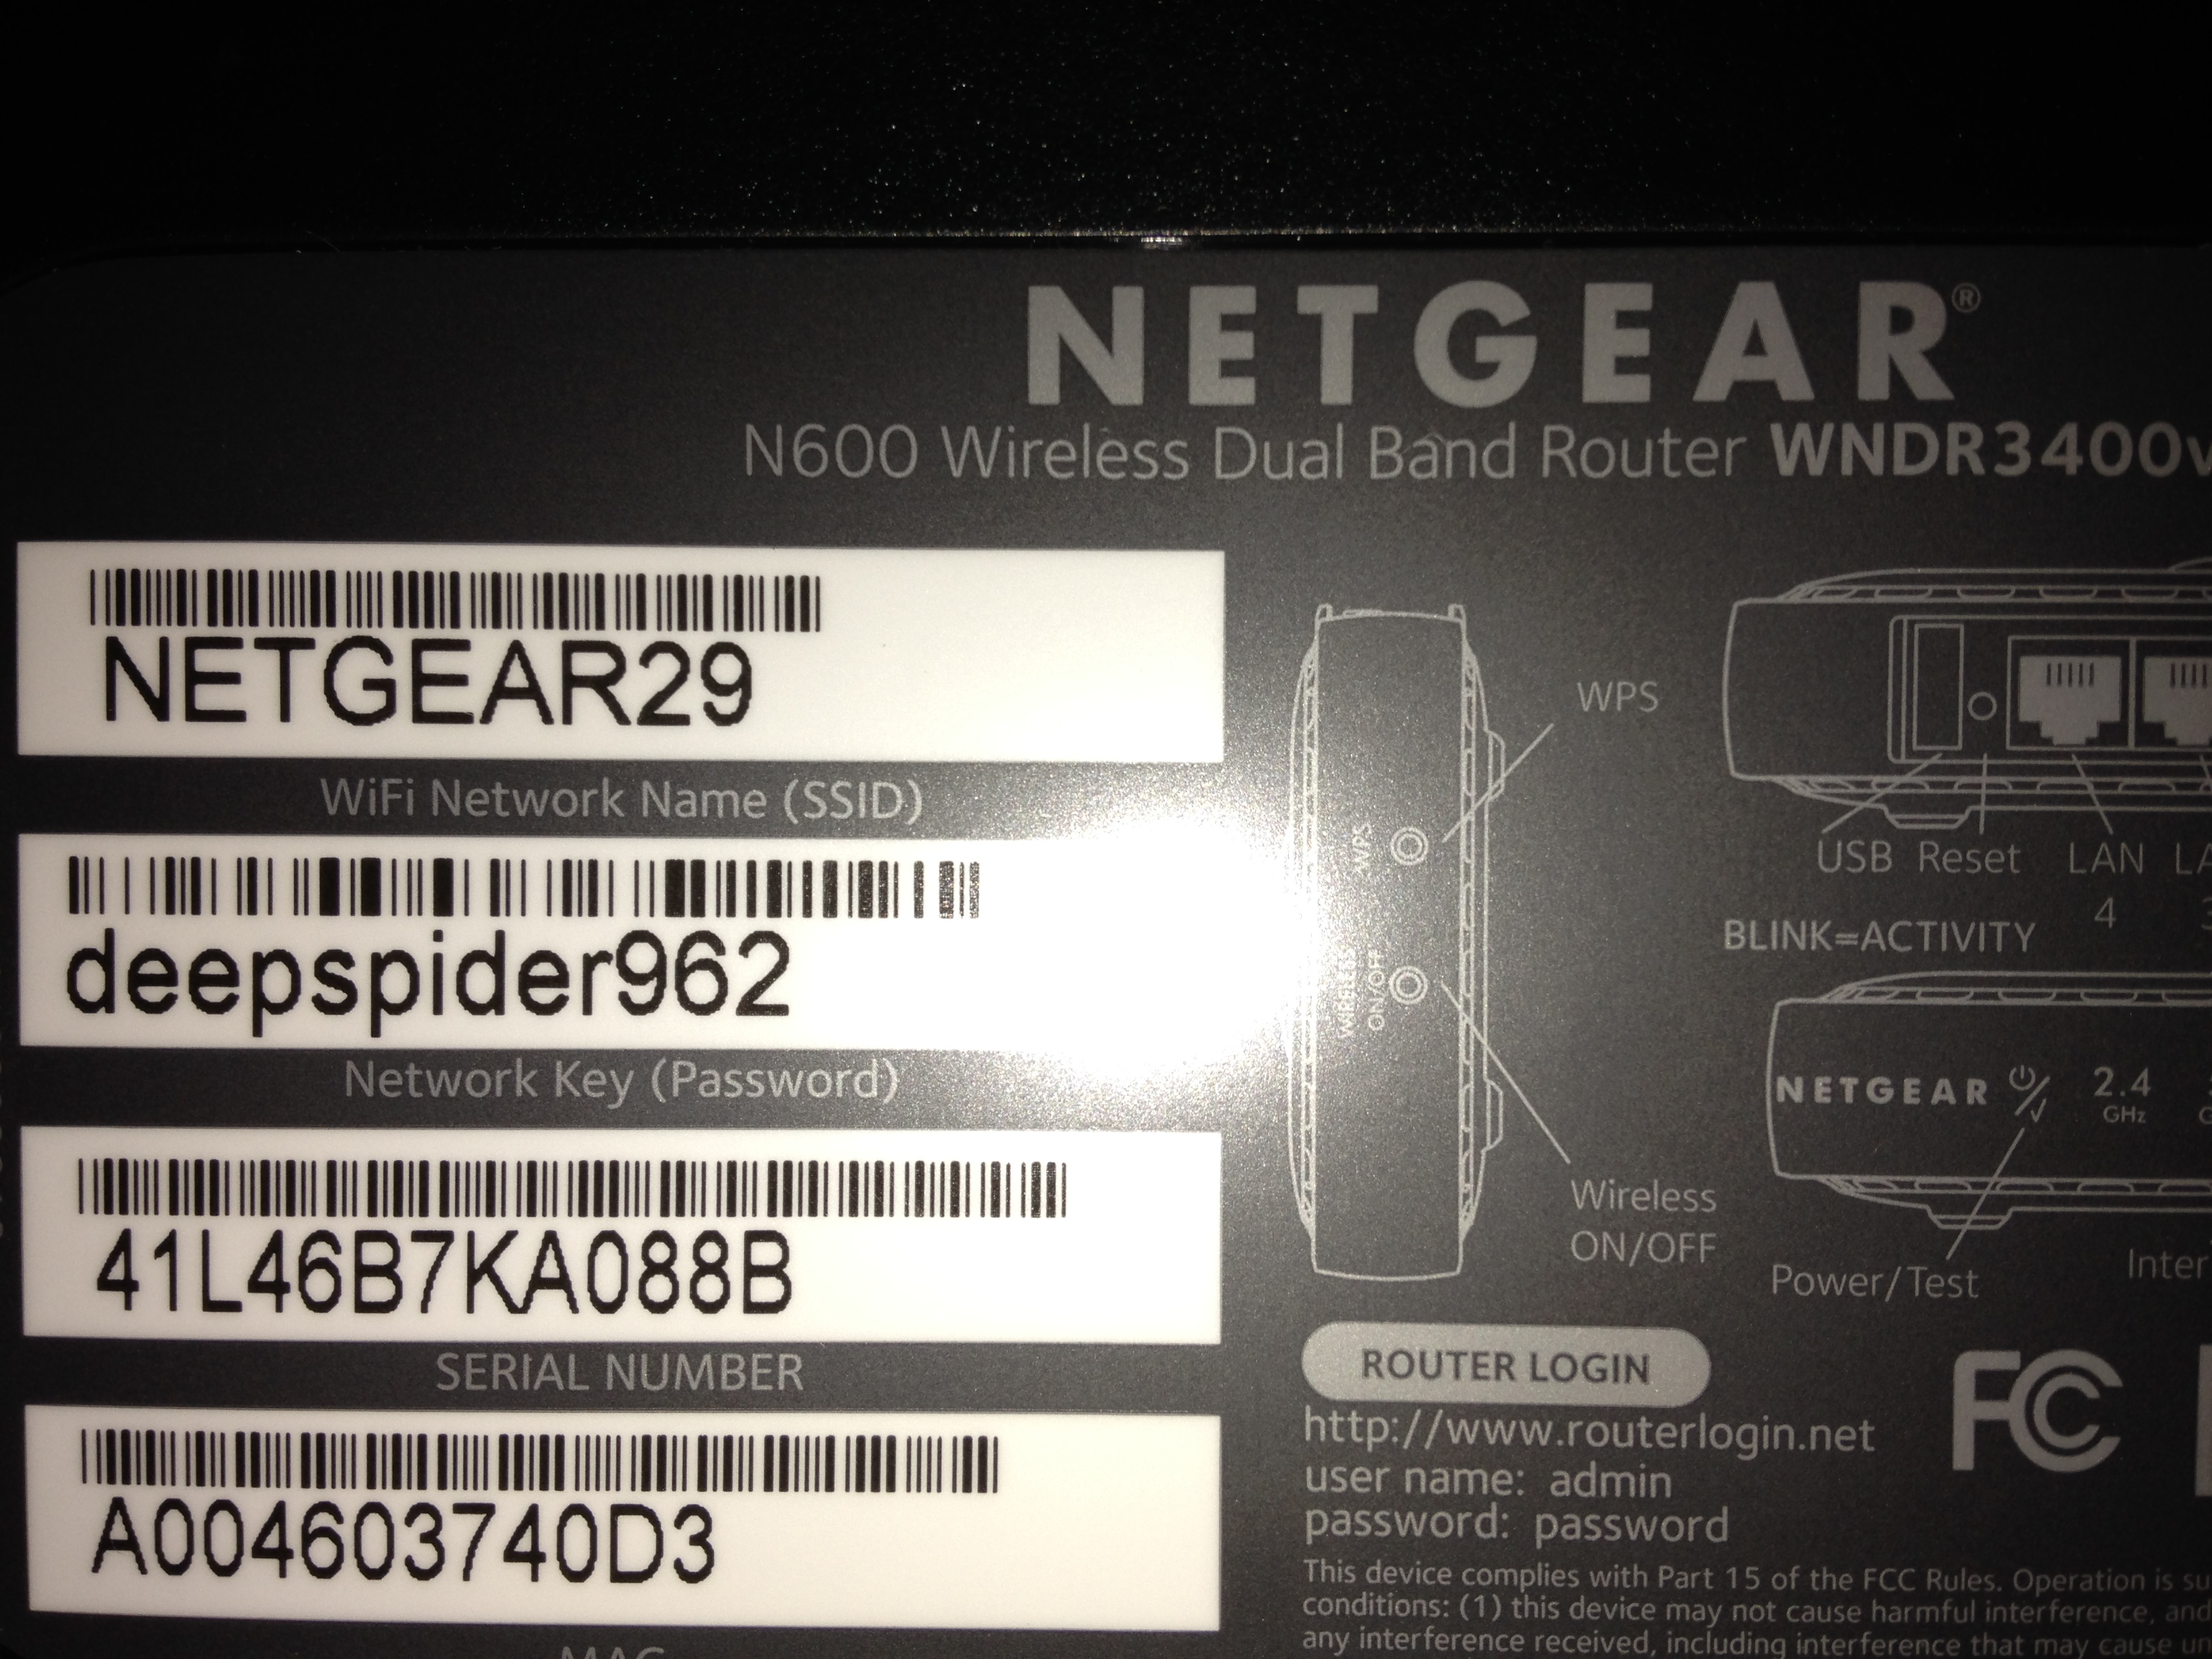 Solved: Can't register my N600 router - NETGEAR Communities